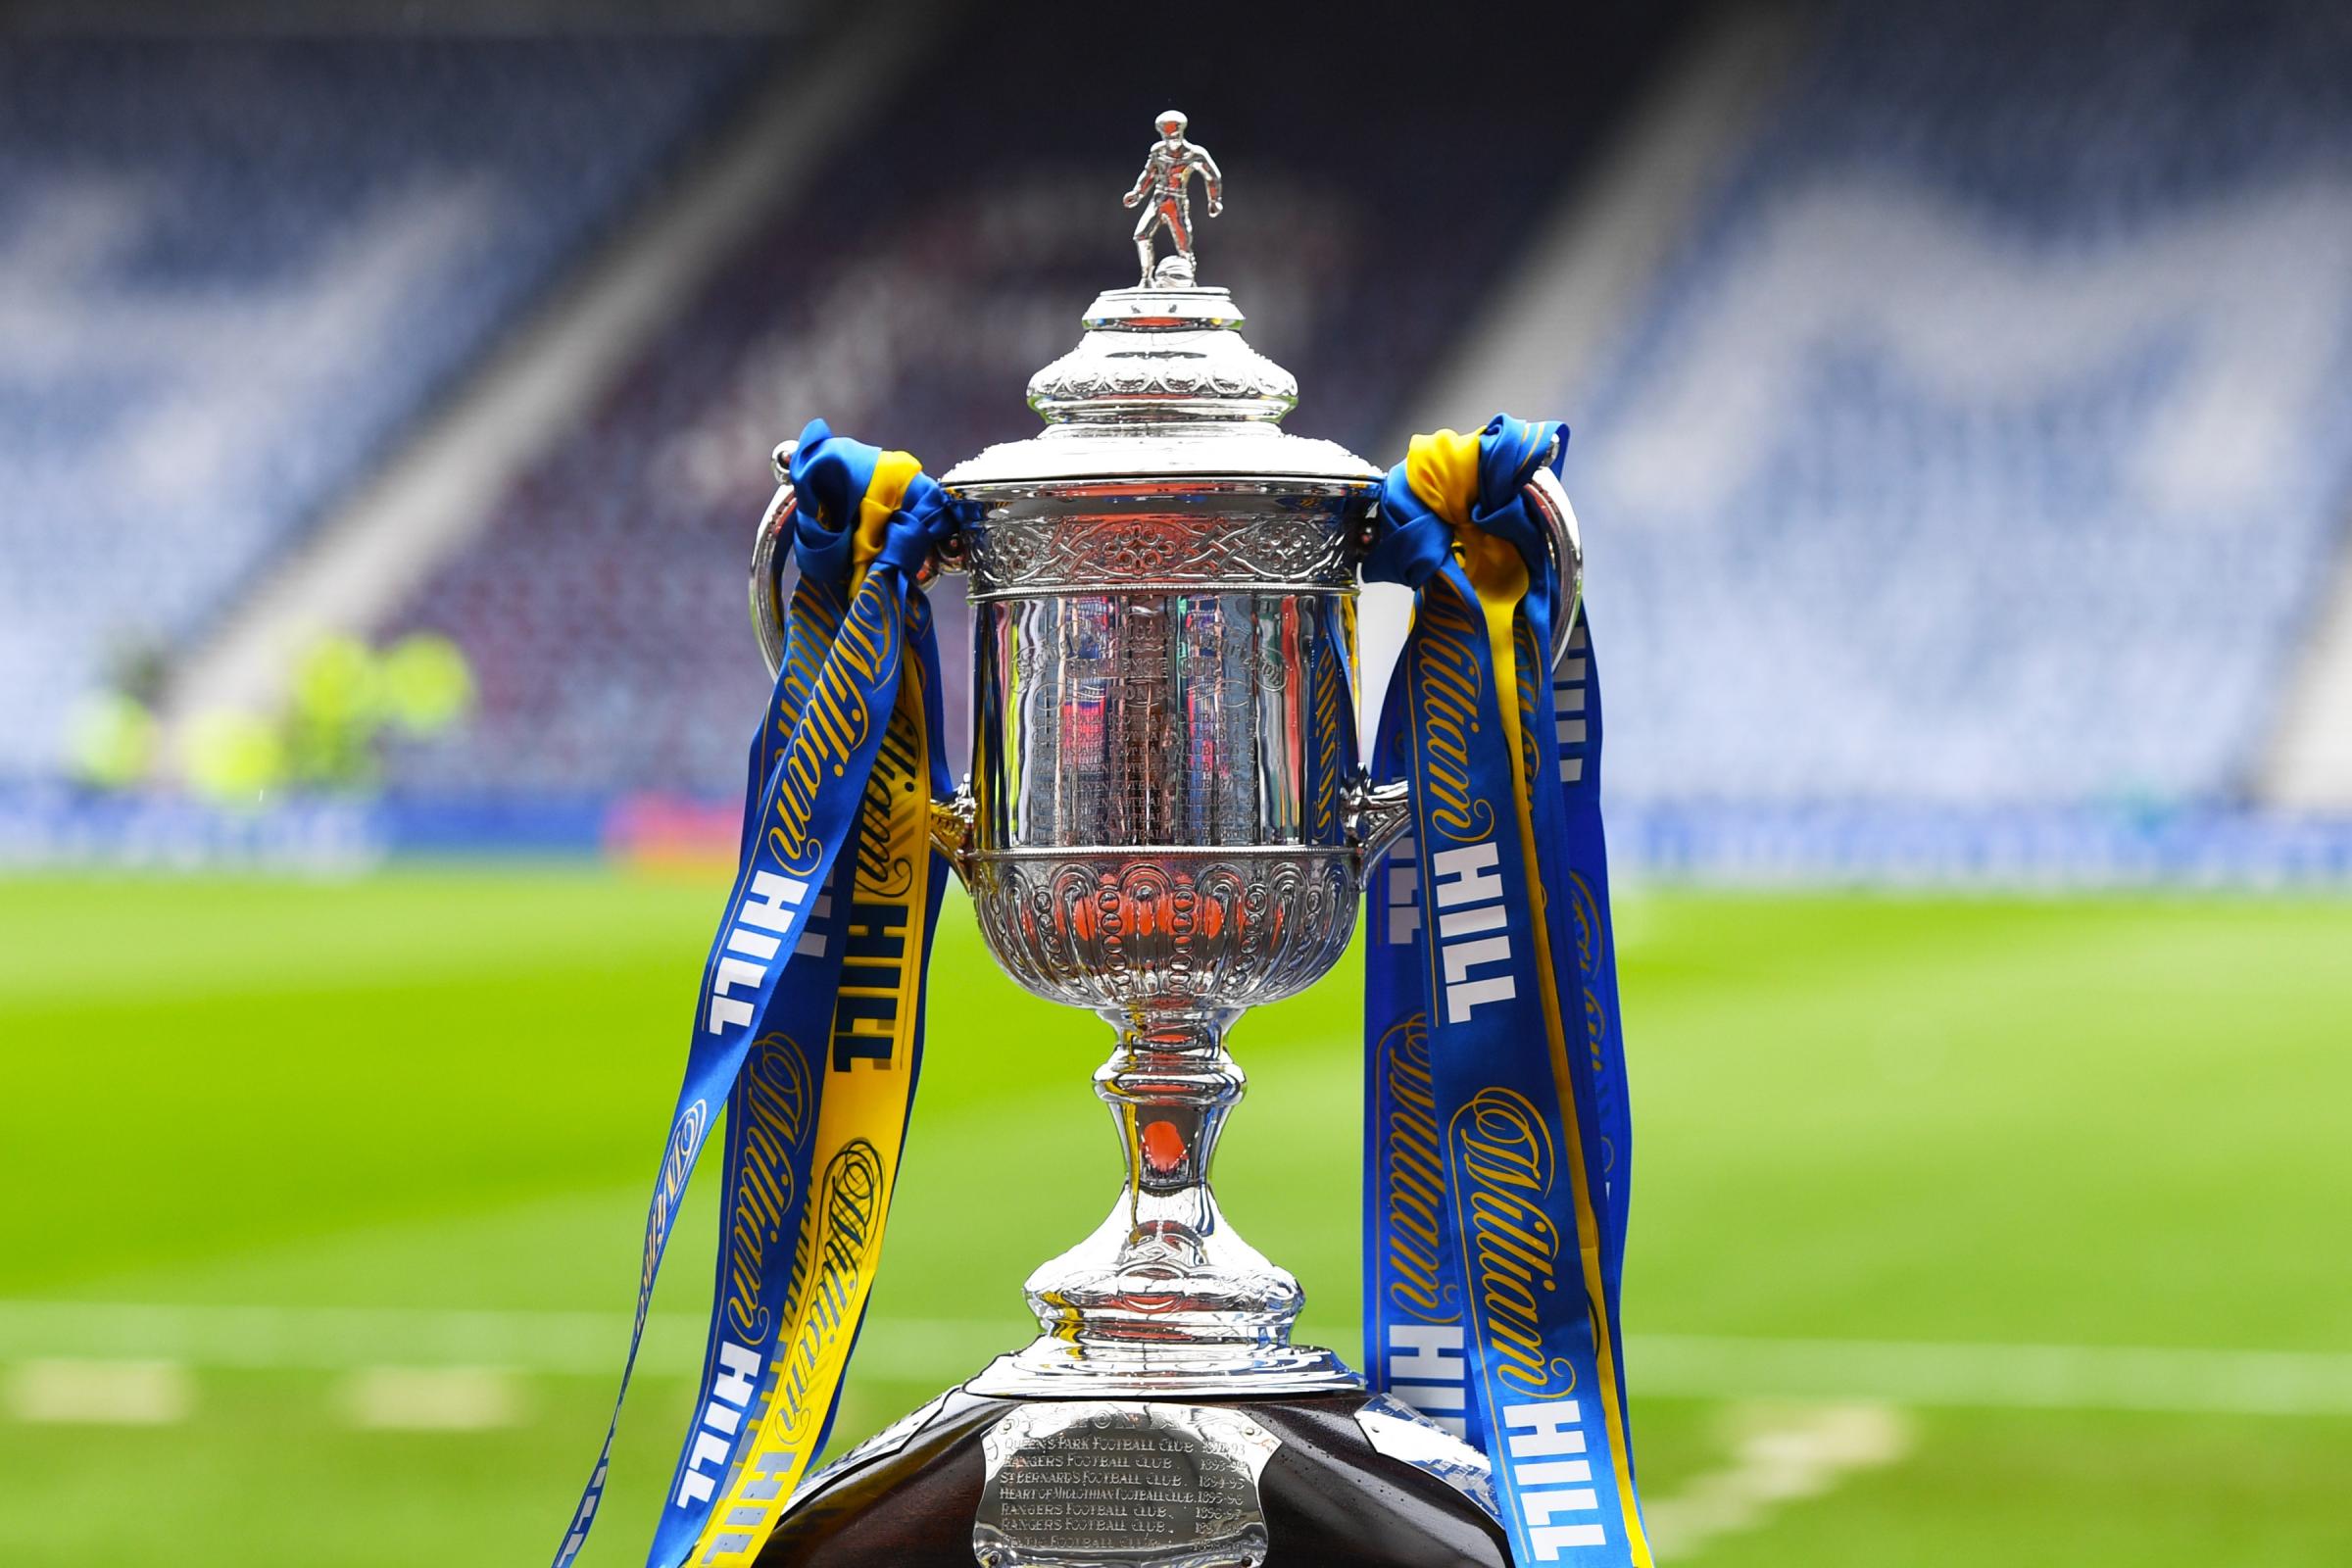 Scottish Cup draw in full: Celtic, Rangers, Aberdeen, Hearts and Hibs learn opponents